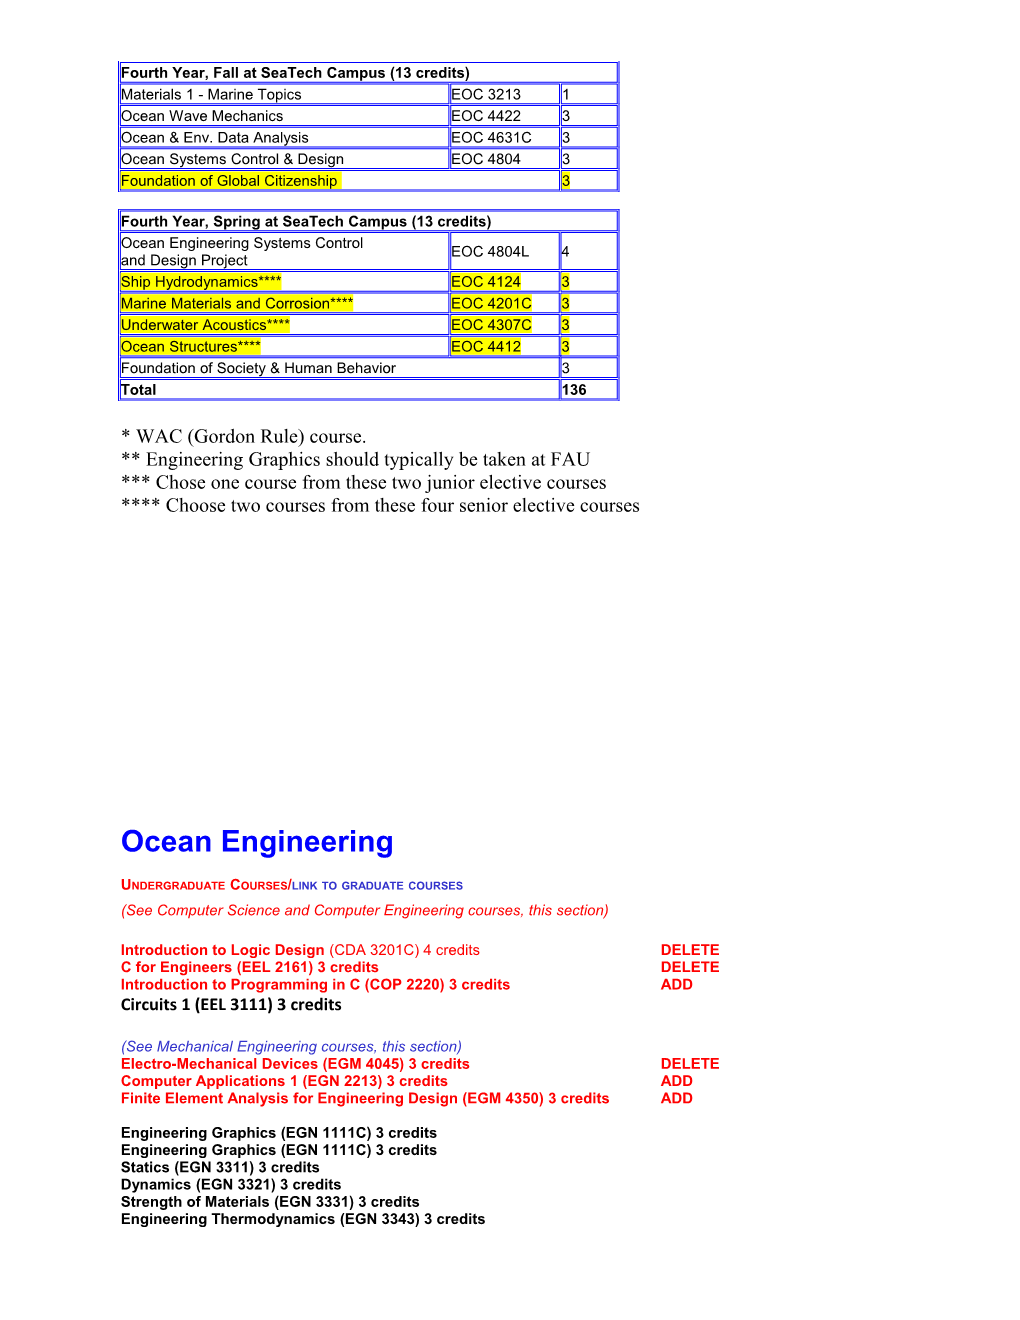 Sample Four-Year Program of Study for Bachelor of Science in Ocean Engineering